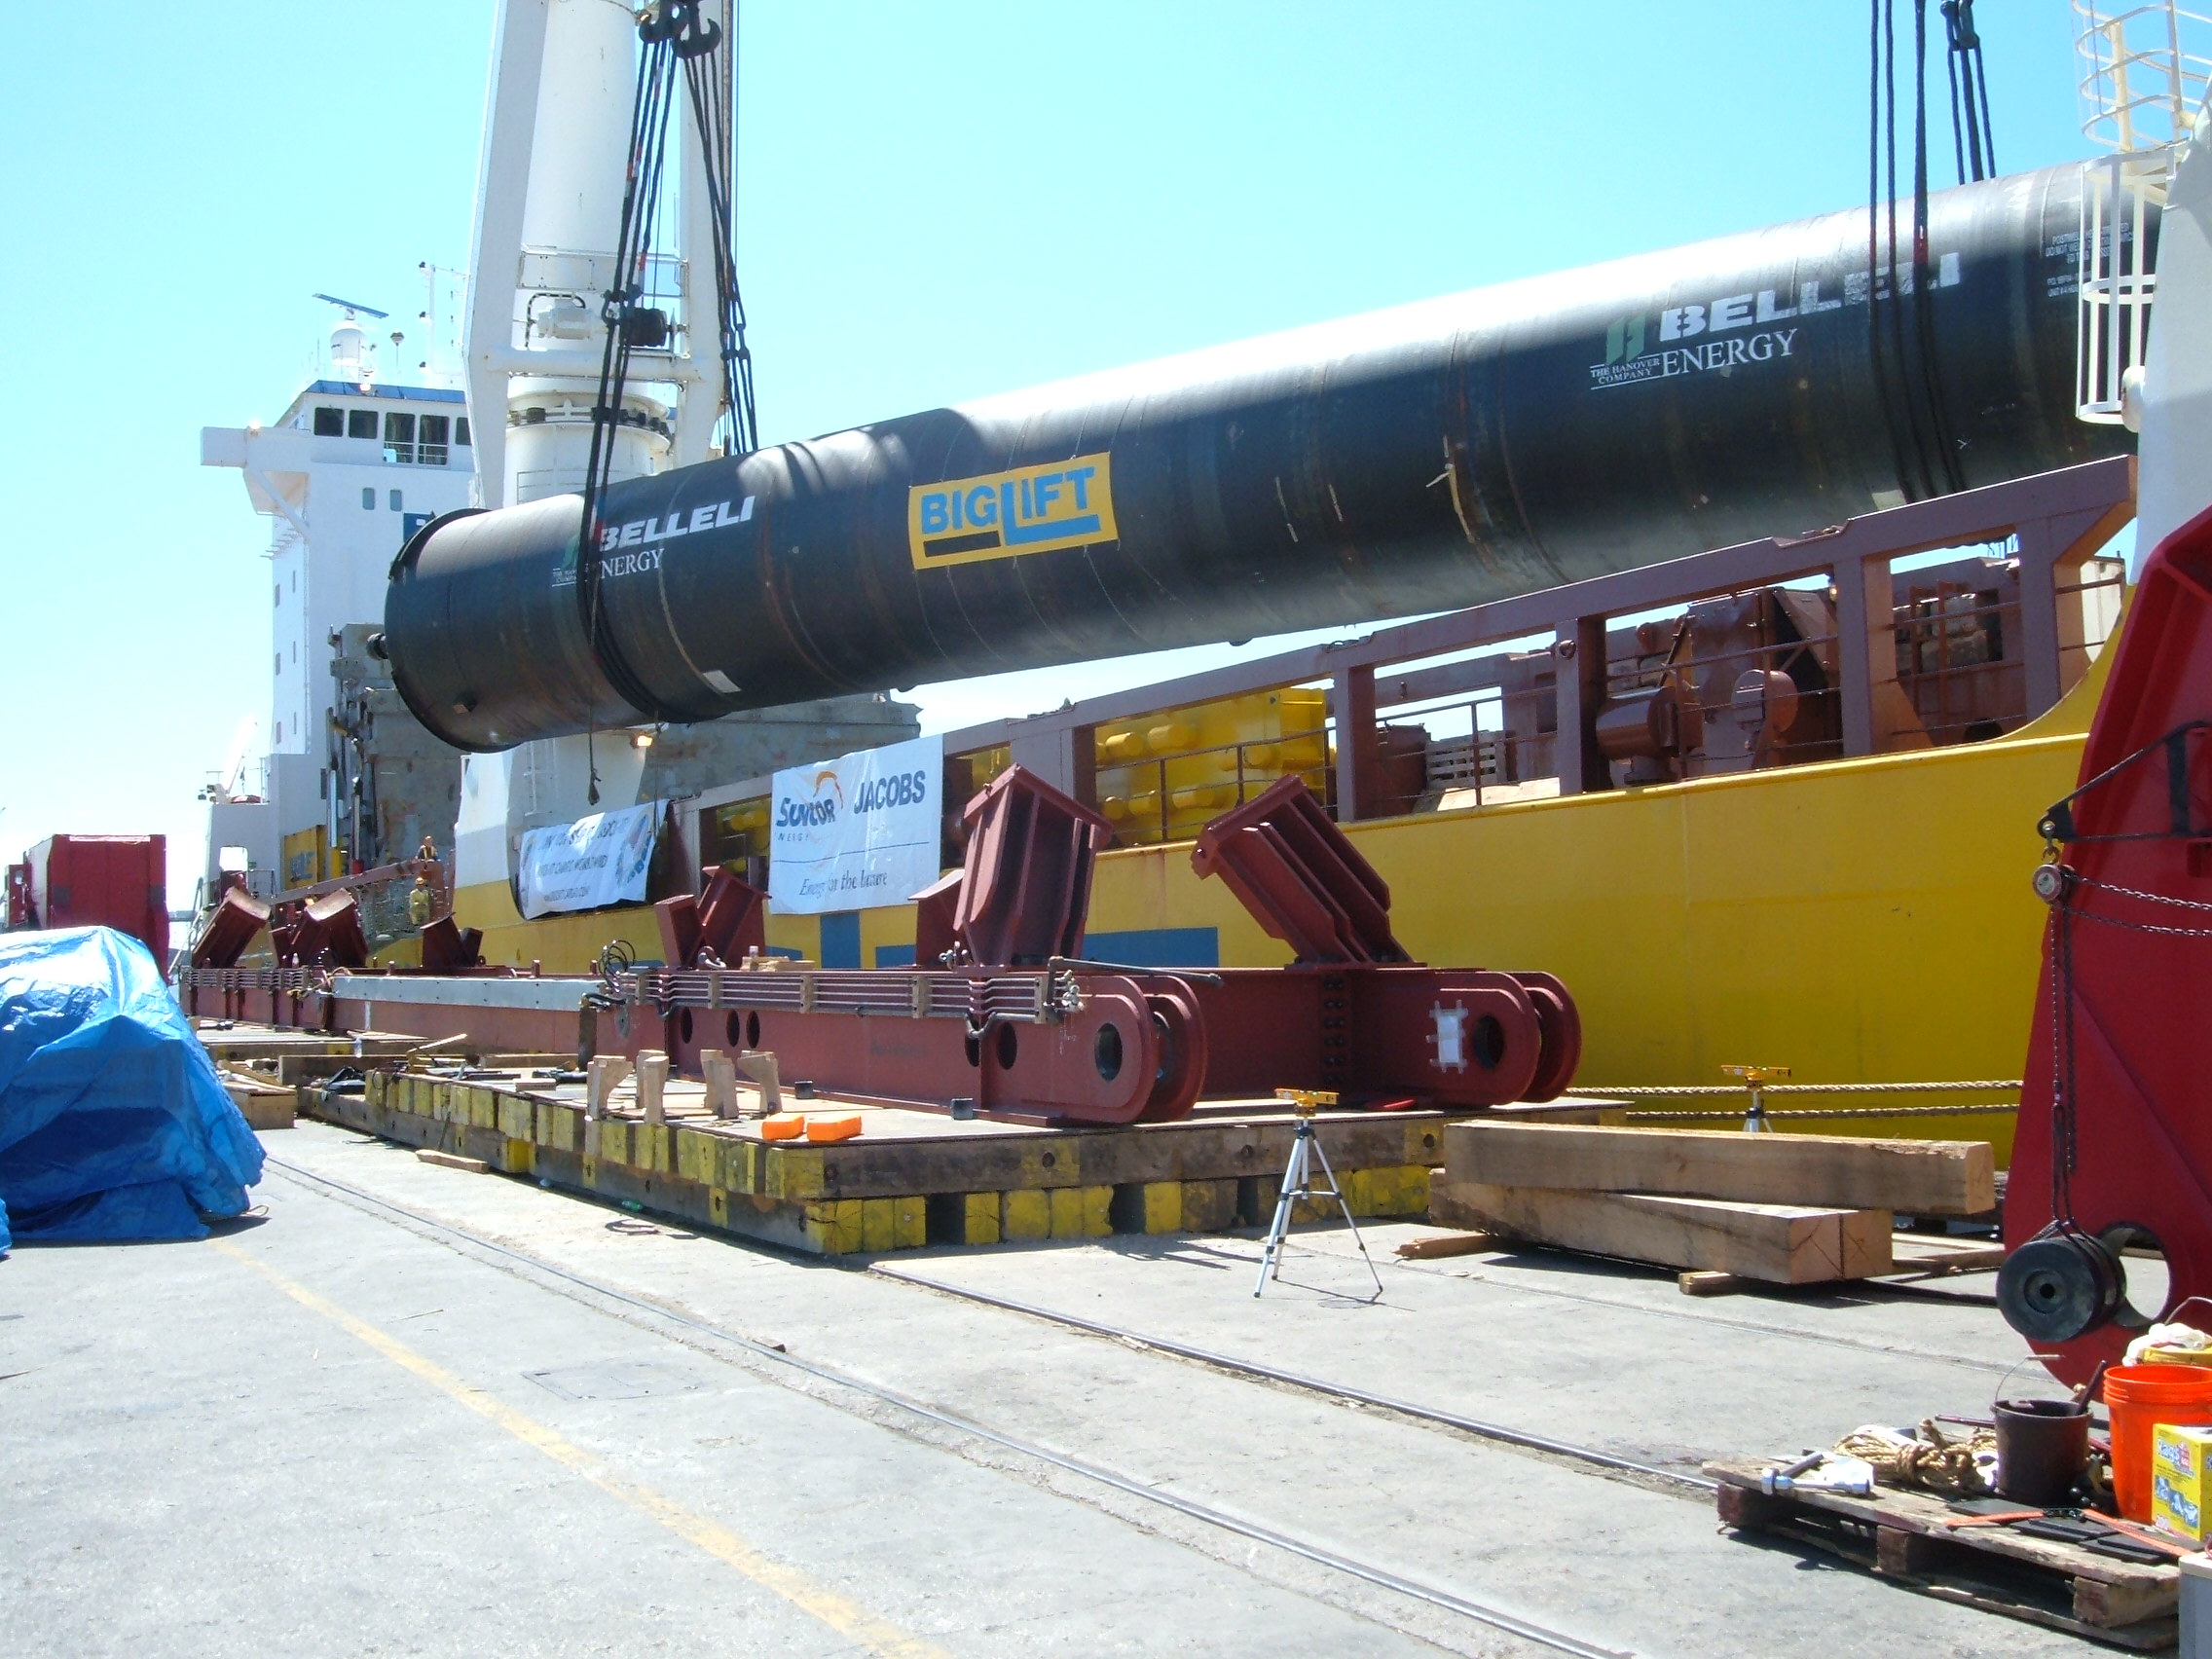   Facilitated and supervised the loading/unloading and intermodal transport of a 1,500,000 pound reactor.  